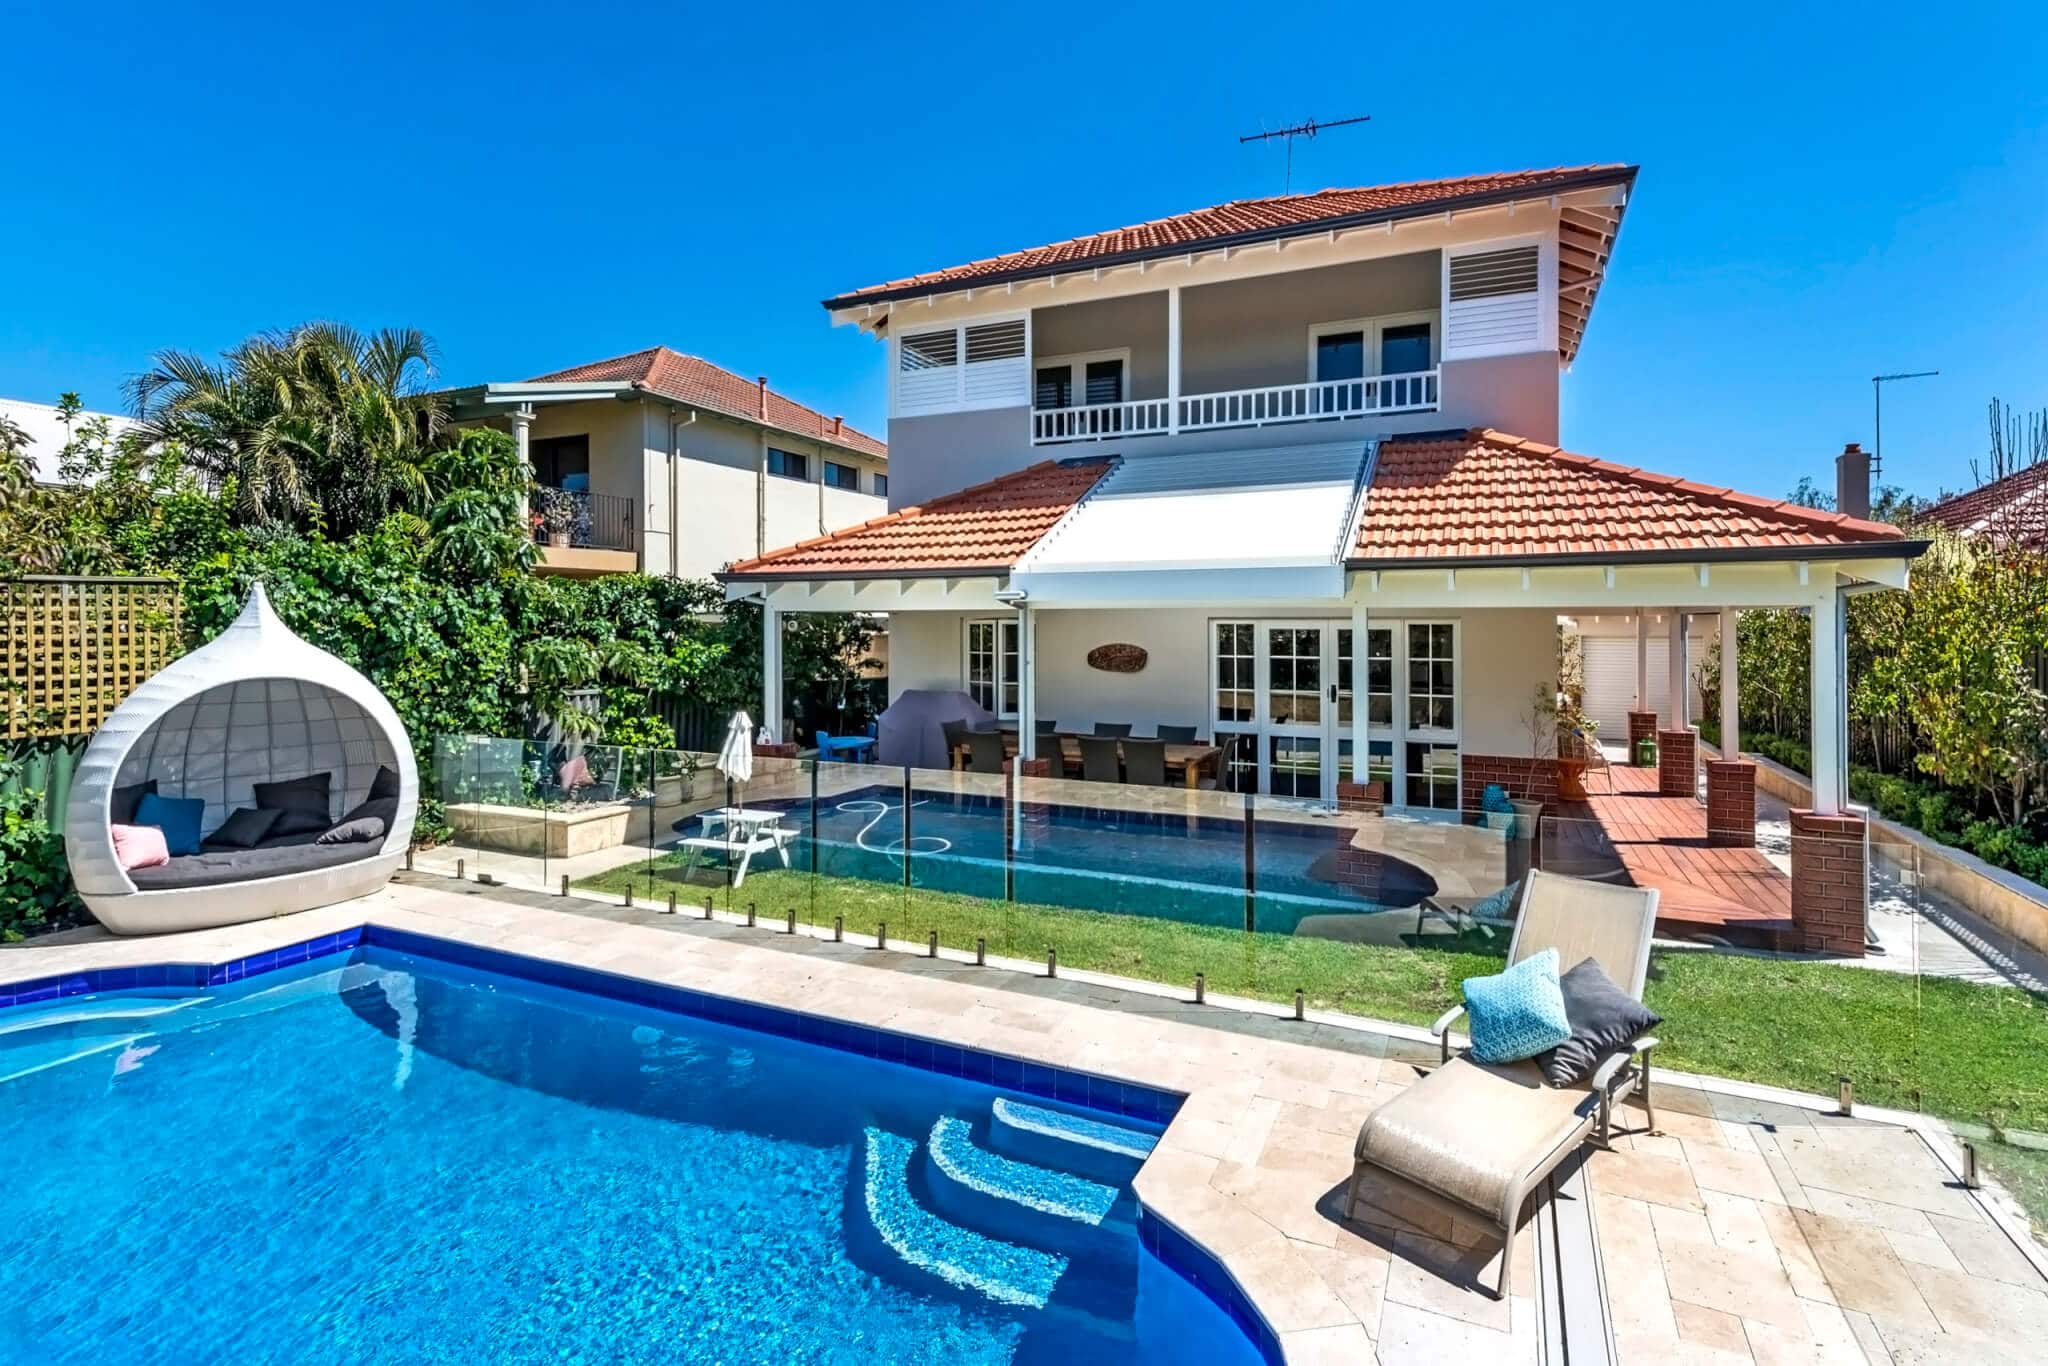 South Perth second storey with swimming pool views